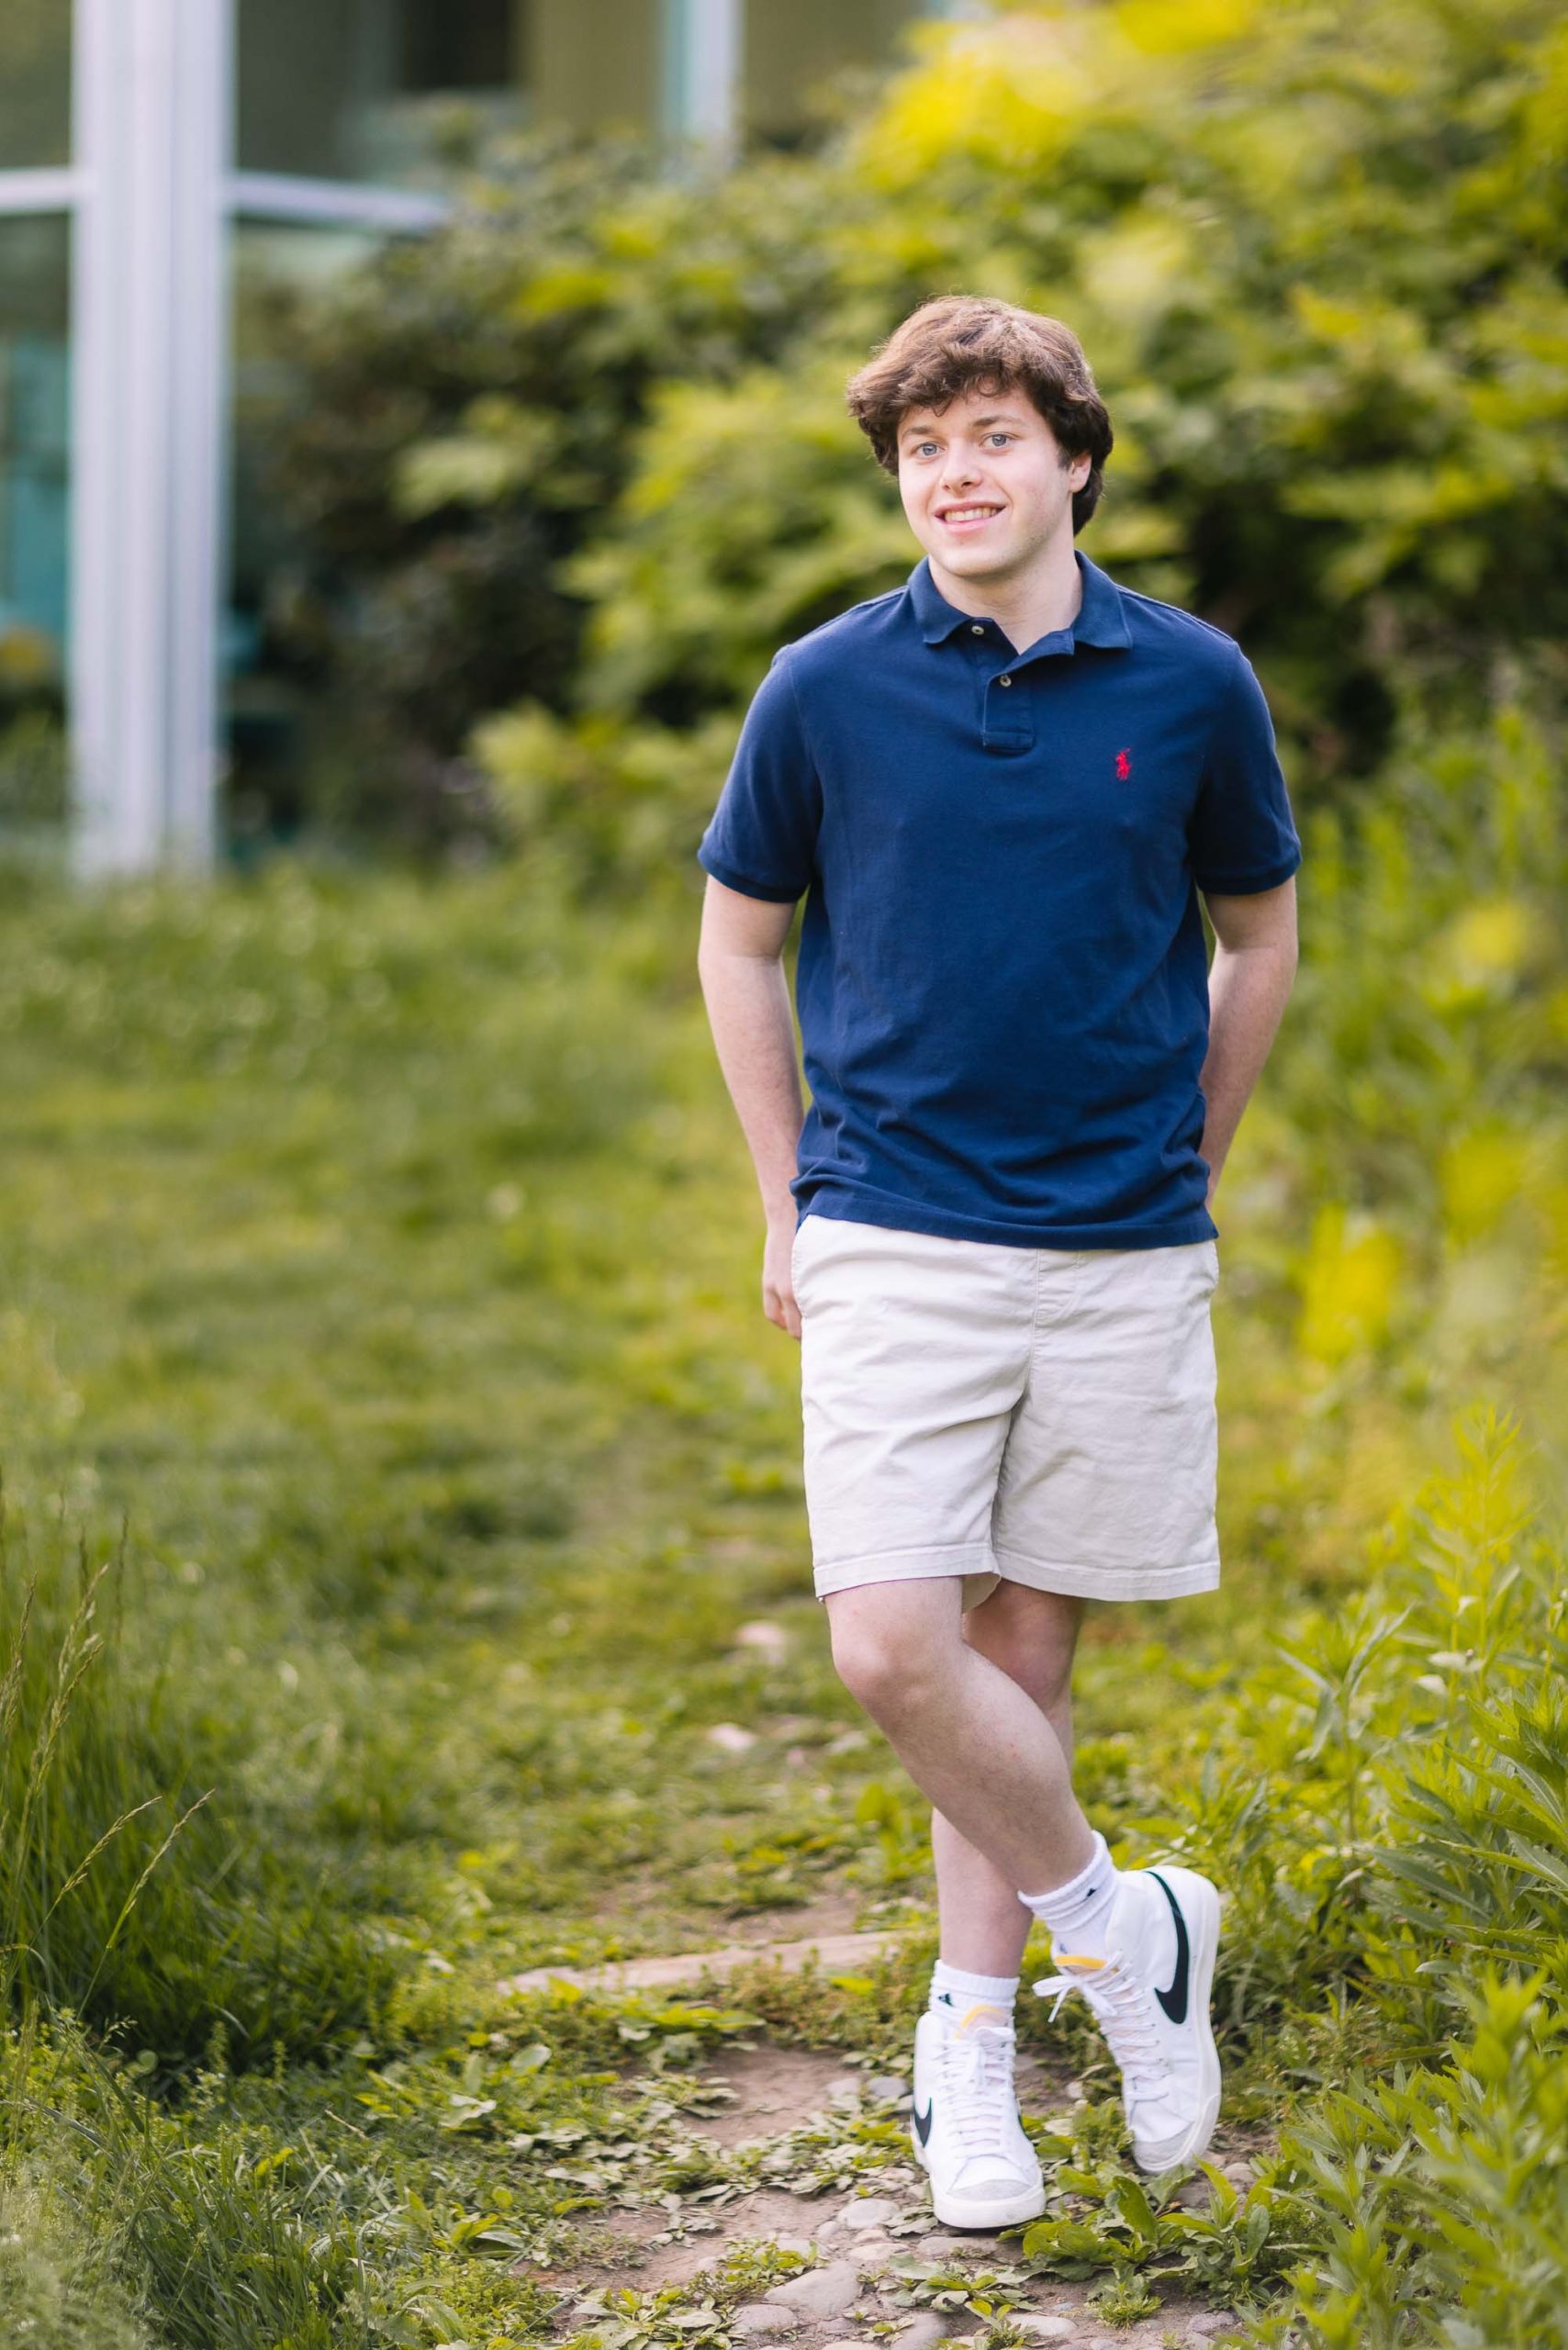 A senior man in a blue shirt and shorts standing in a grassy area.